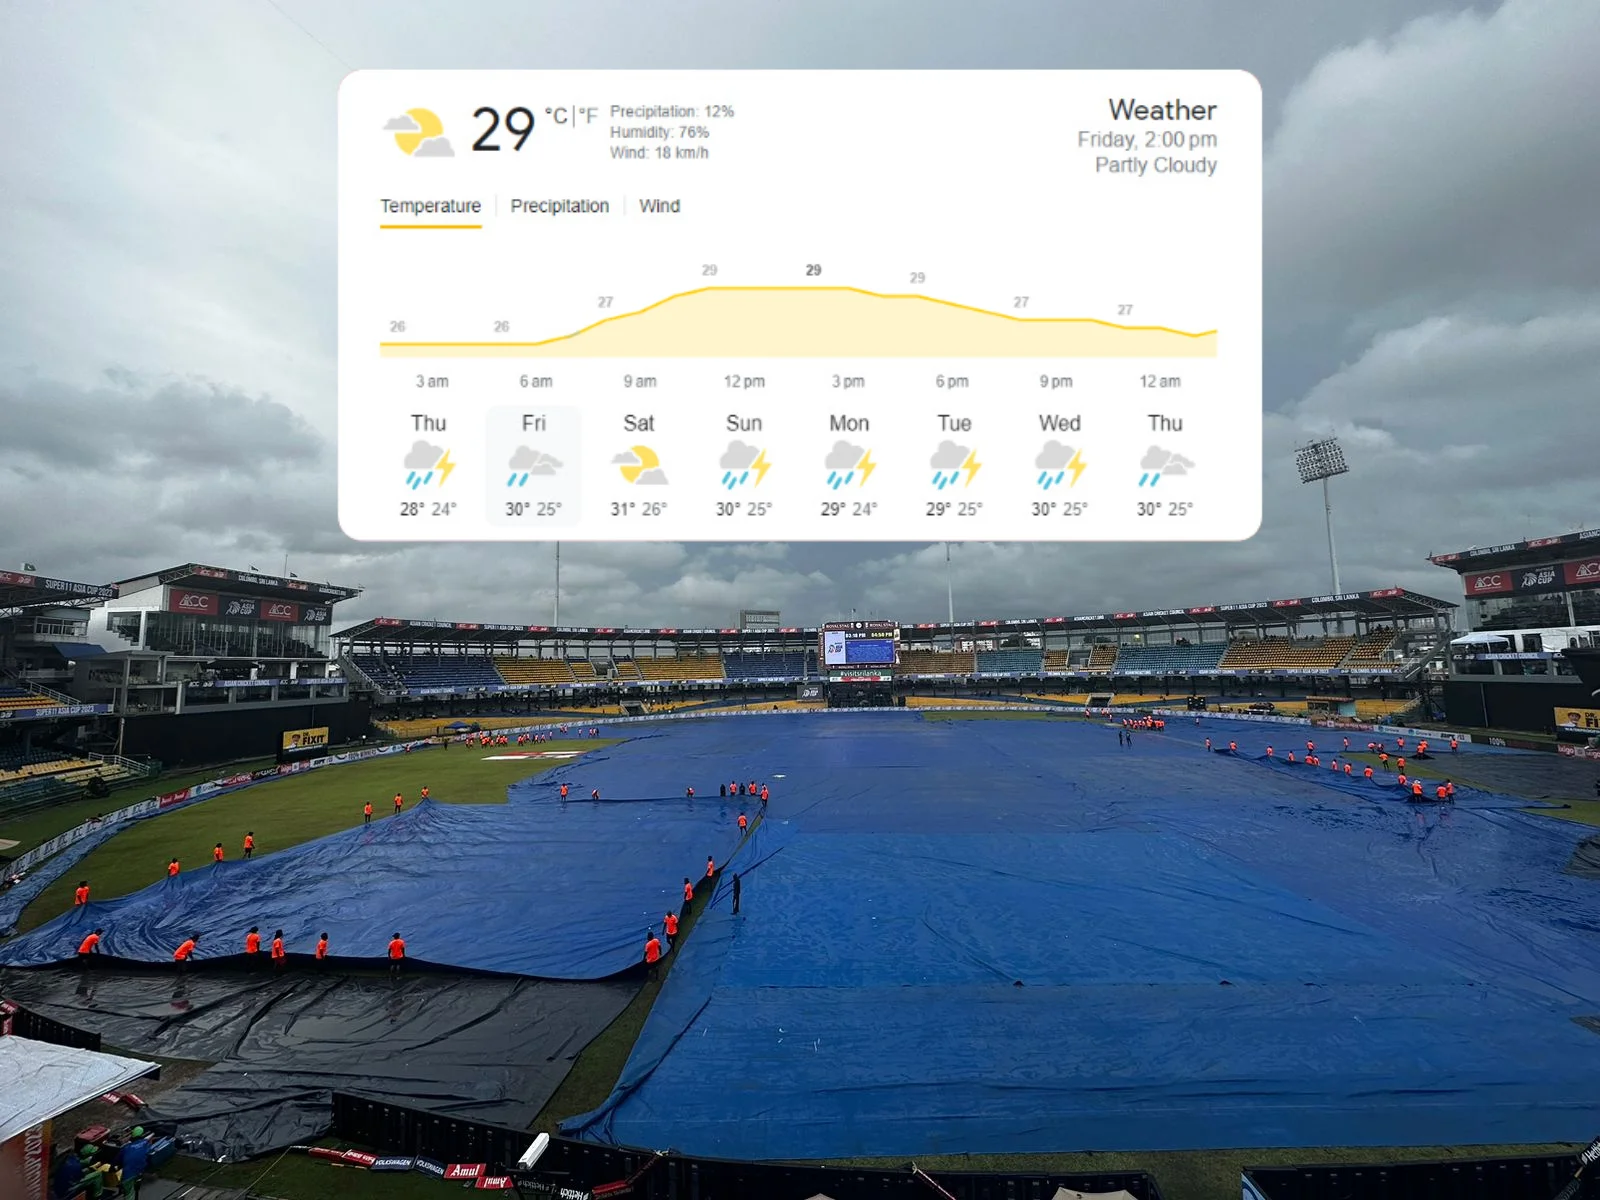 Colombo Weather Forecast - IND vs BAN